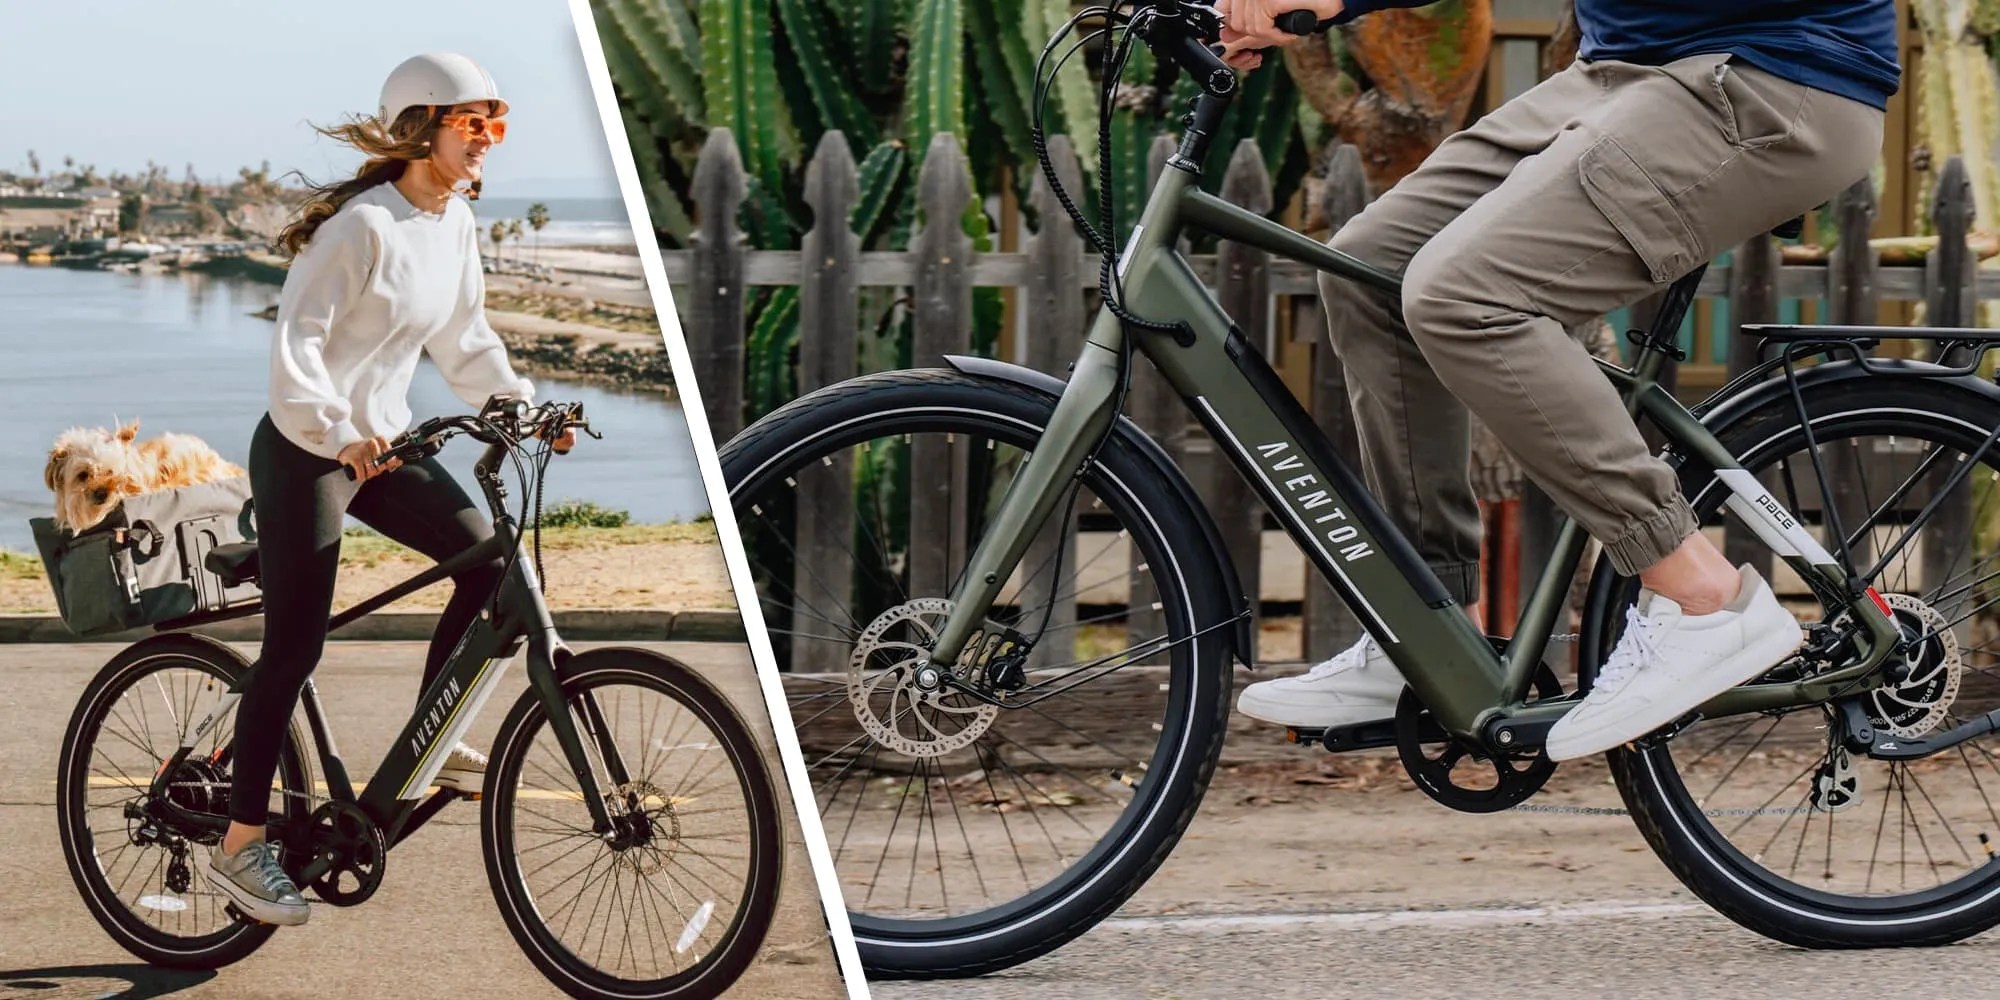 Aventons Pace 500.3 e-bike sees $700 flash sale discount down to $1,599